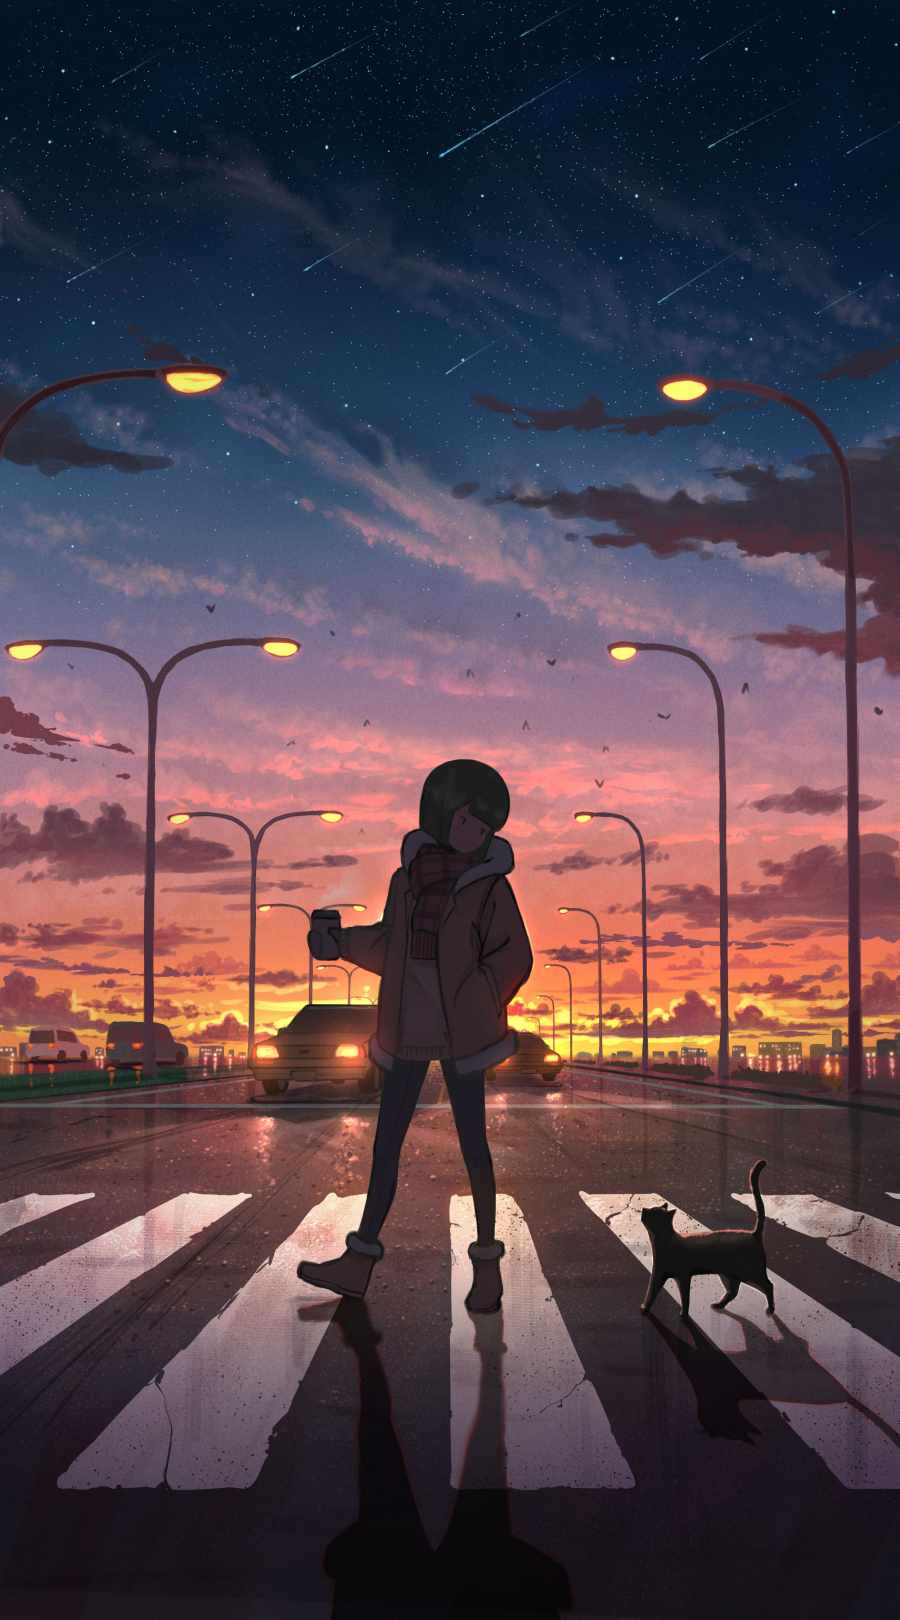 Girl With Cat Anime IPhone Wallpaper - IPhone Wallpapers : iPhone Wallpapers